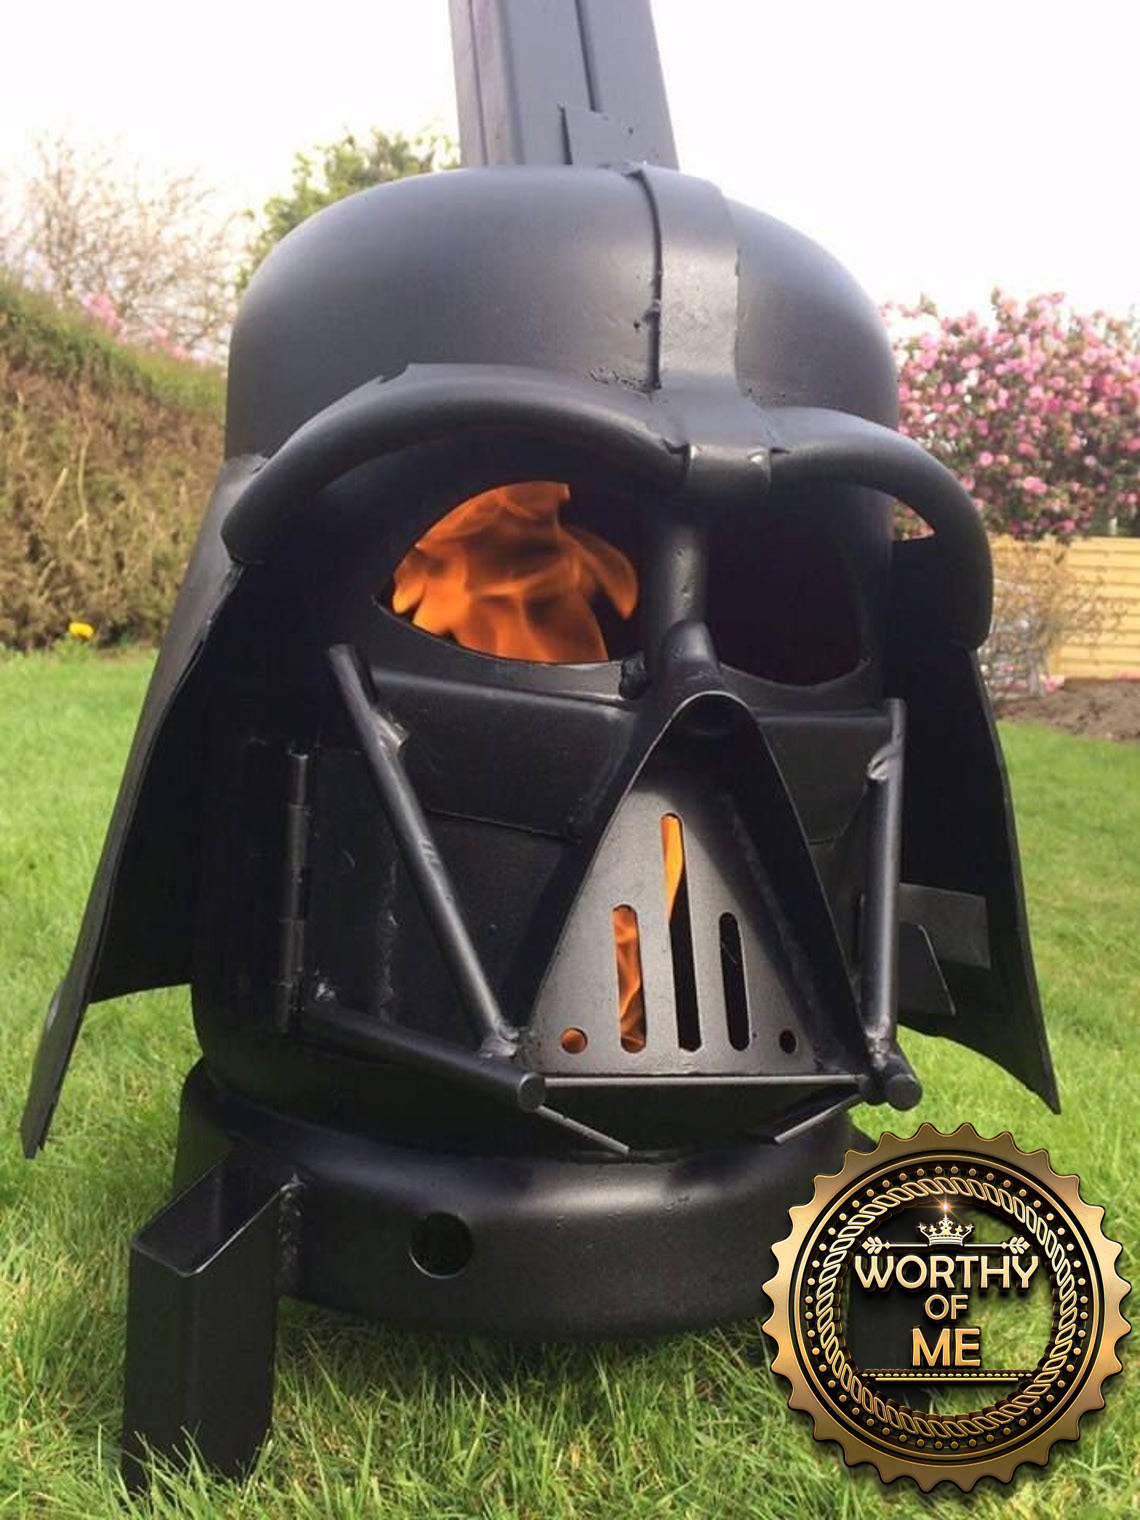 Darth Vader Fire Pit Worthy Of His, Darth Vader Fire Pit